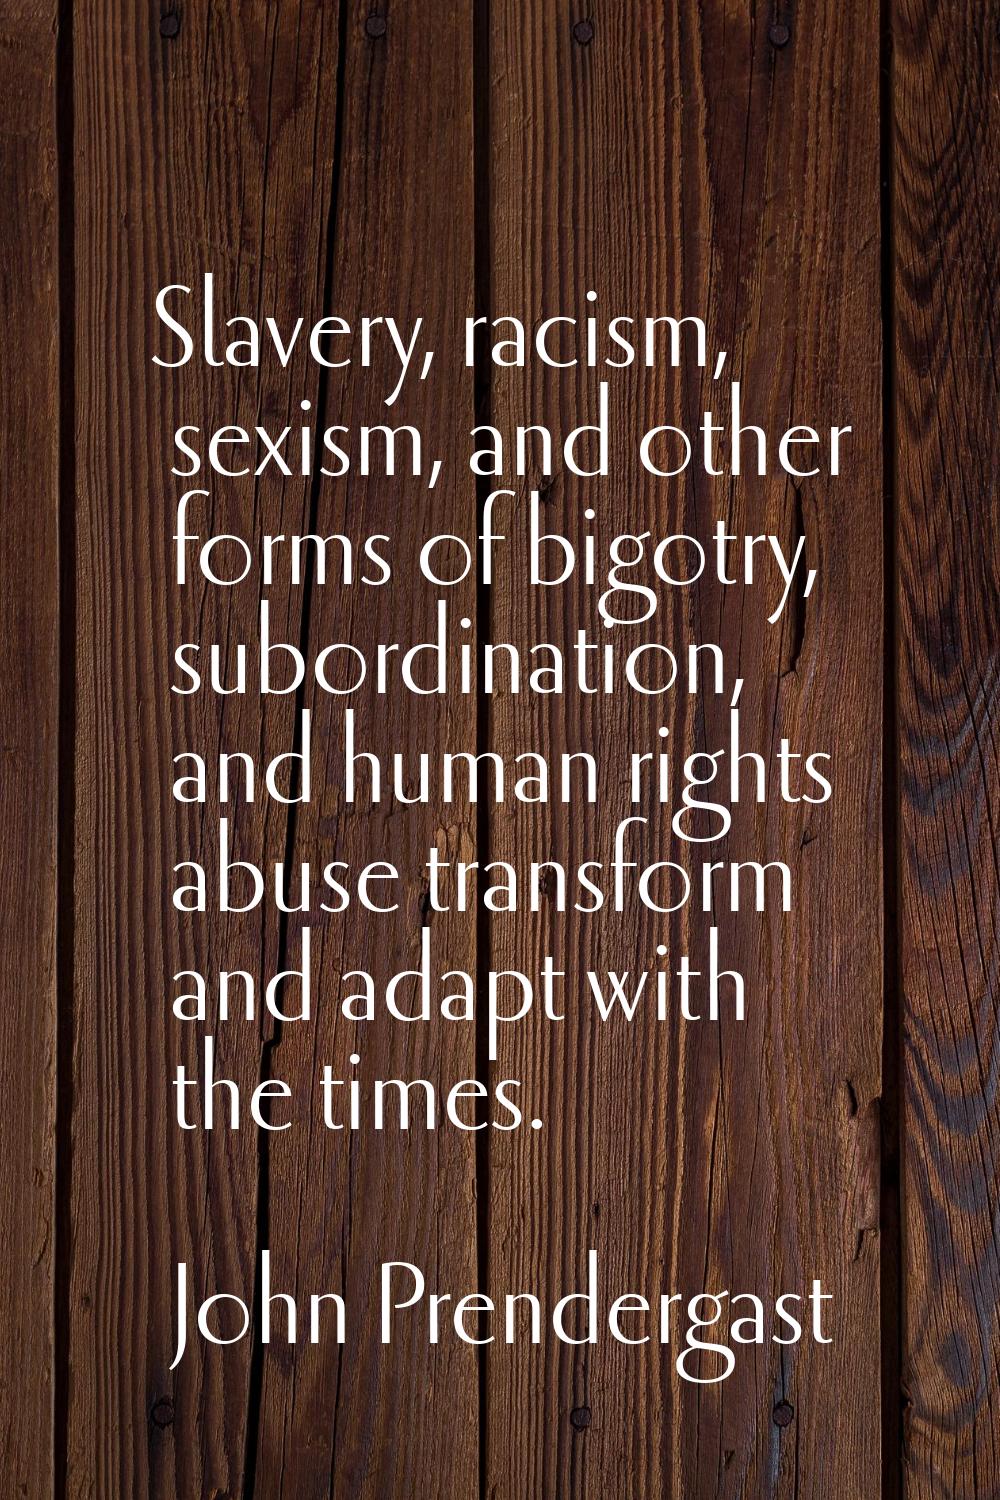 Slavery, racism, sexism, and other forms of bigotry, subordination, and human rights abuse transfor